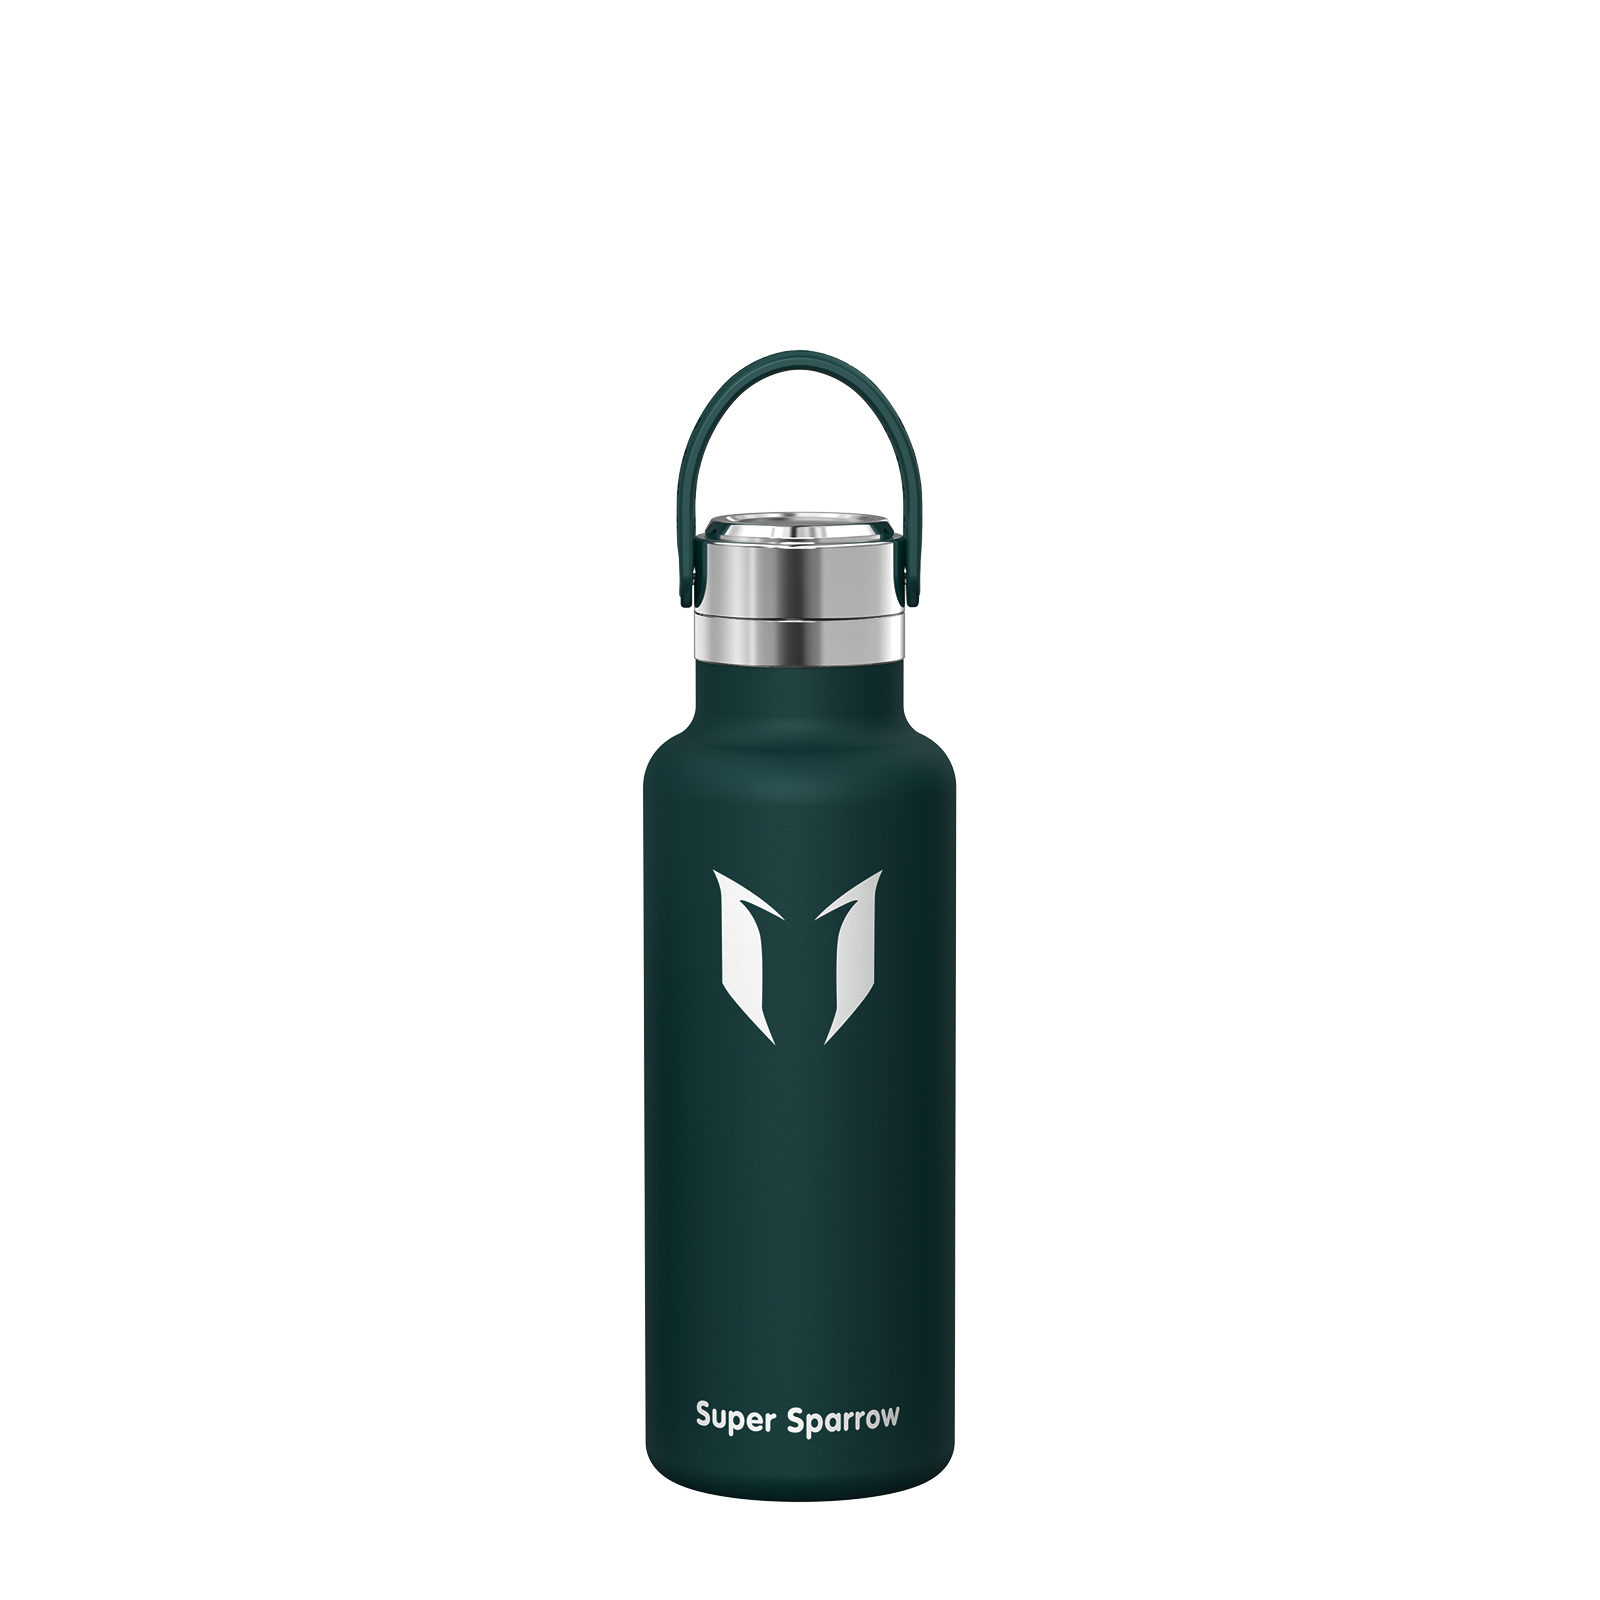 Super Sparrow 750ml To-Go Stainless Steel Water Bottle, Apple Green